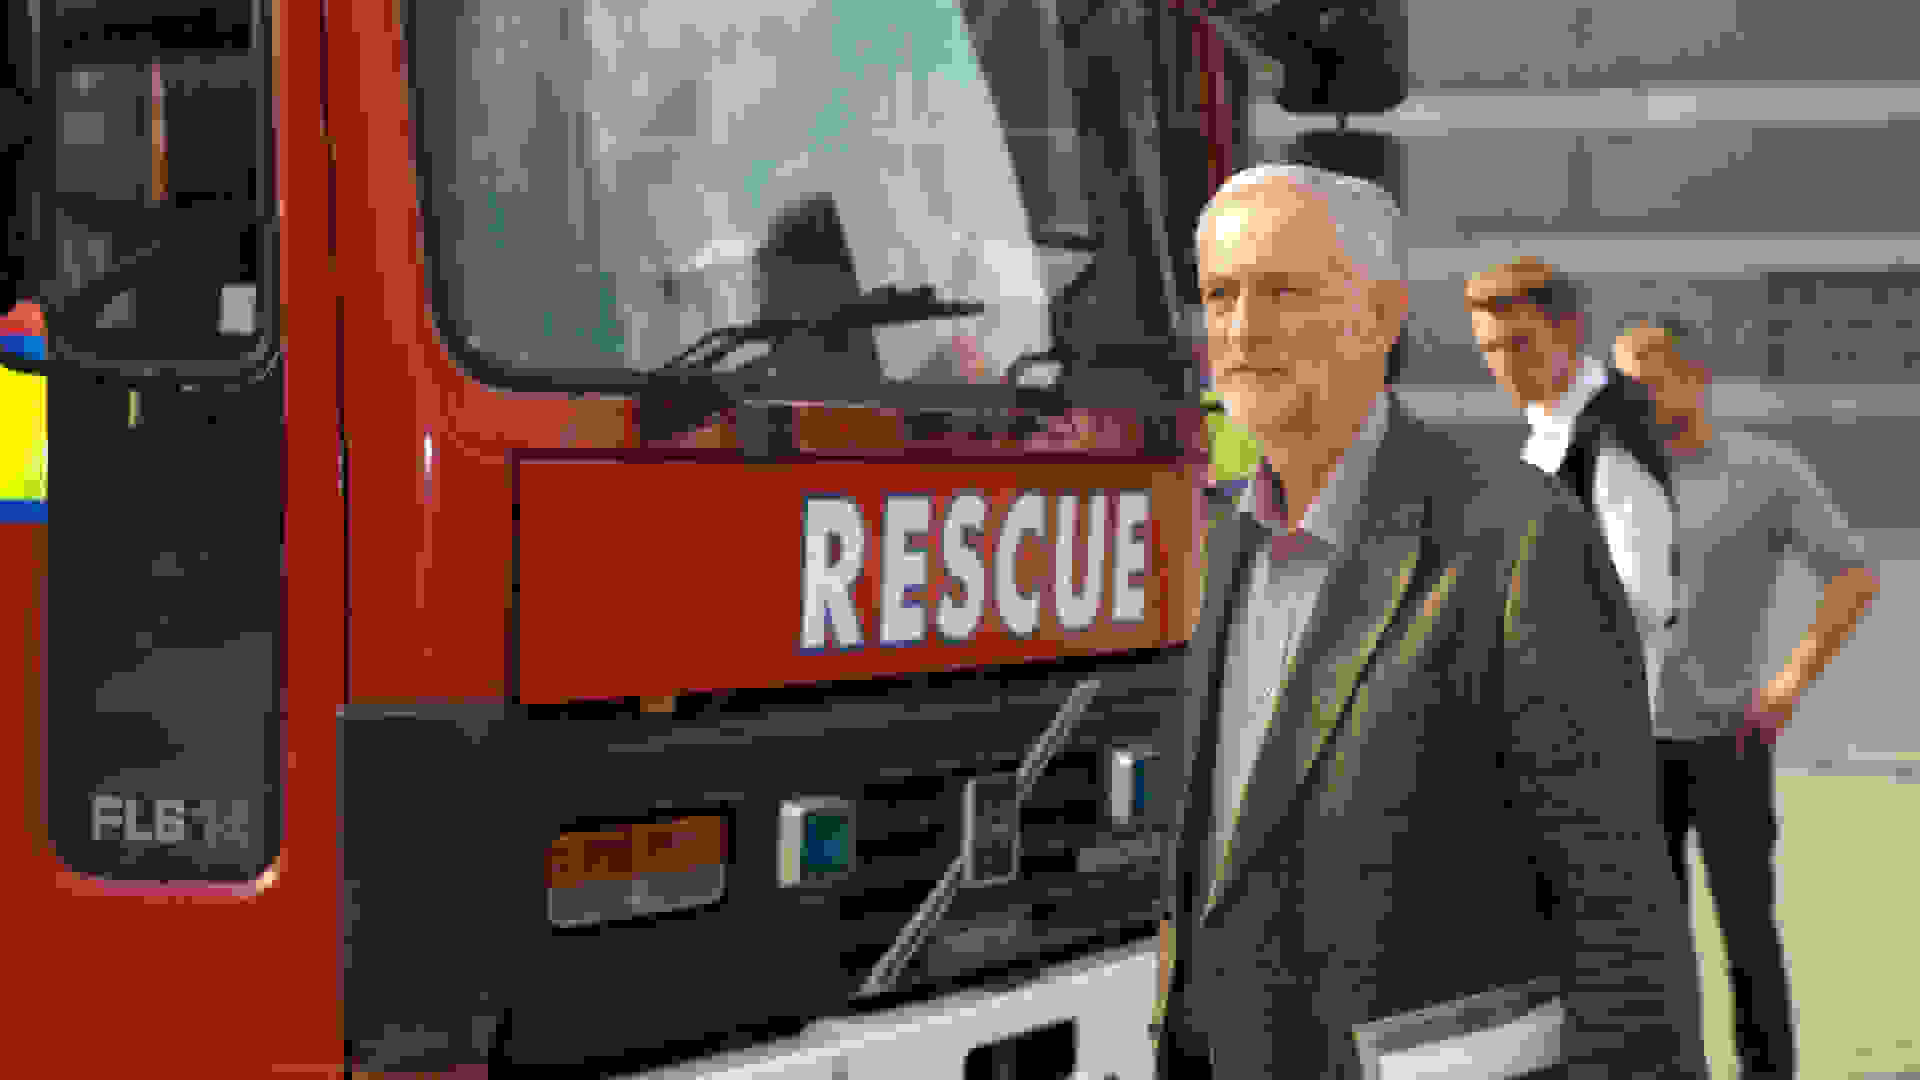 Photo of Jeremy Corbyn stood next to a fire engine with 'Rescue' on the front. Image Courtesy: Bob Peters, Licensed under the Creative Commons Attribution-NonCommercial 2.0